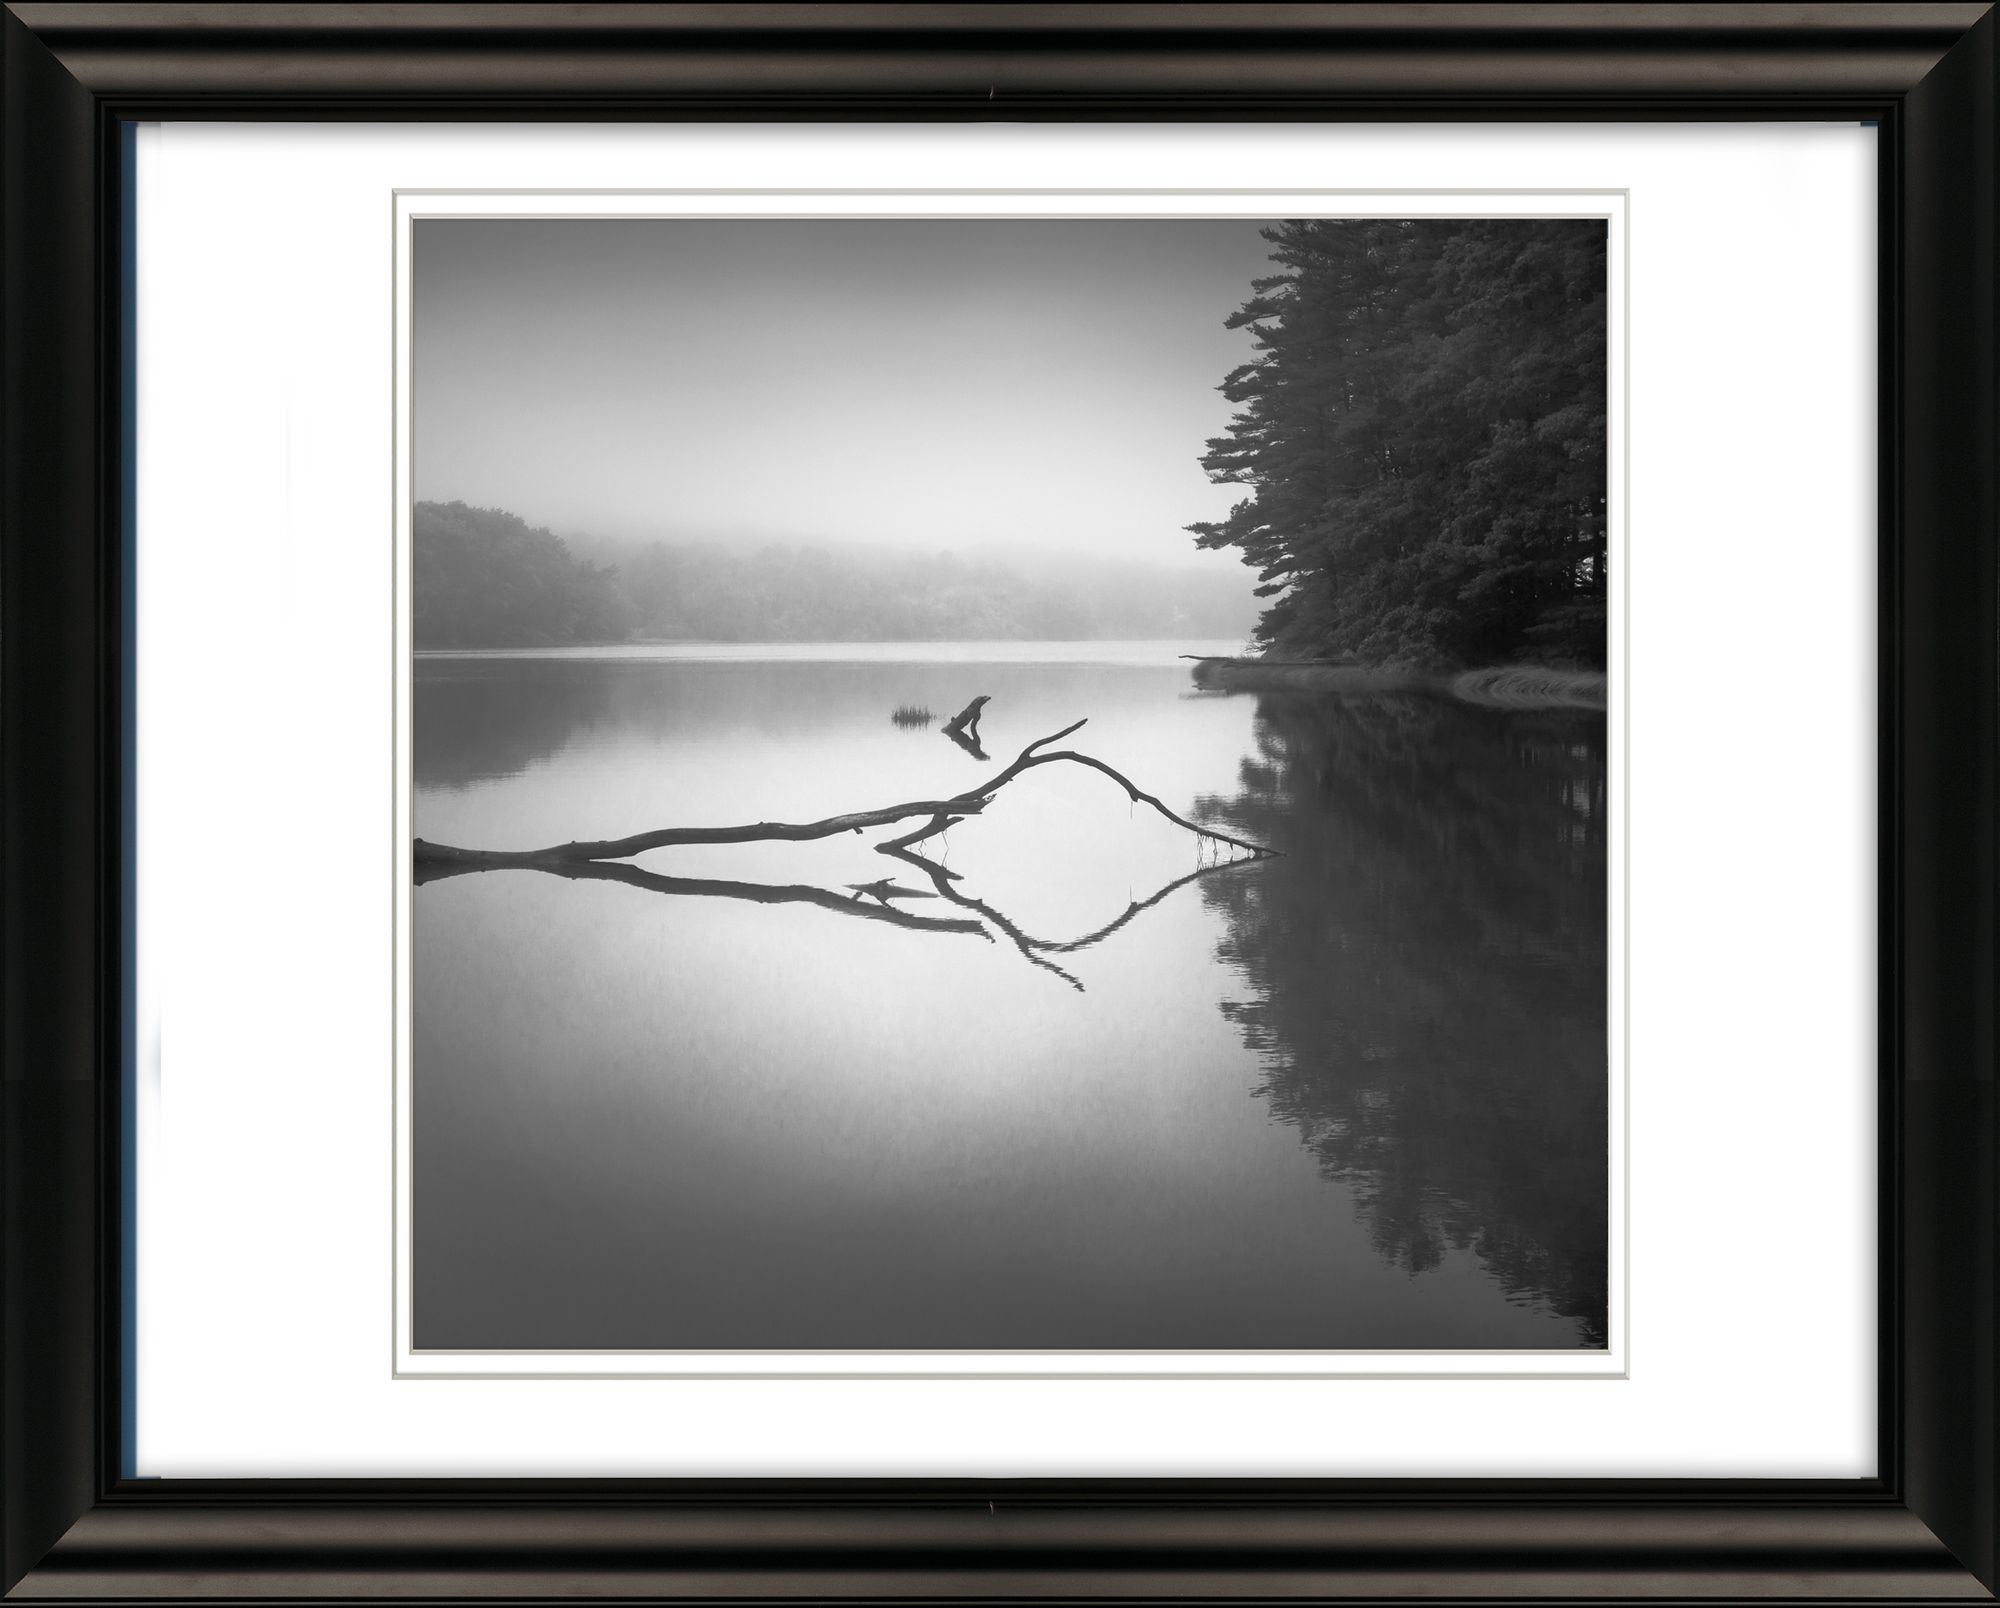 Reflection of Wood in Lake with Fog, Maine